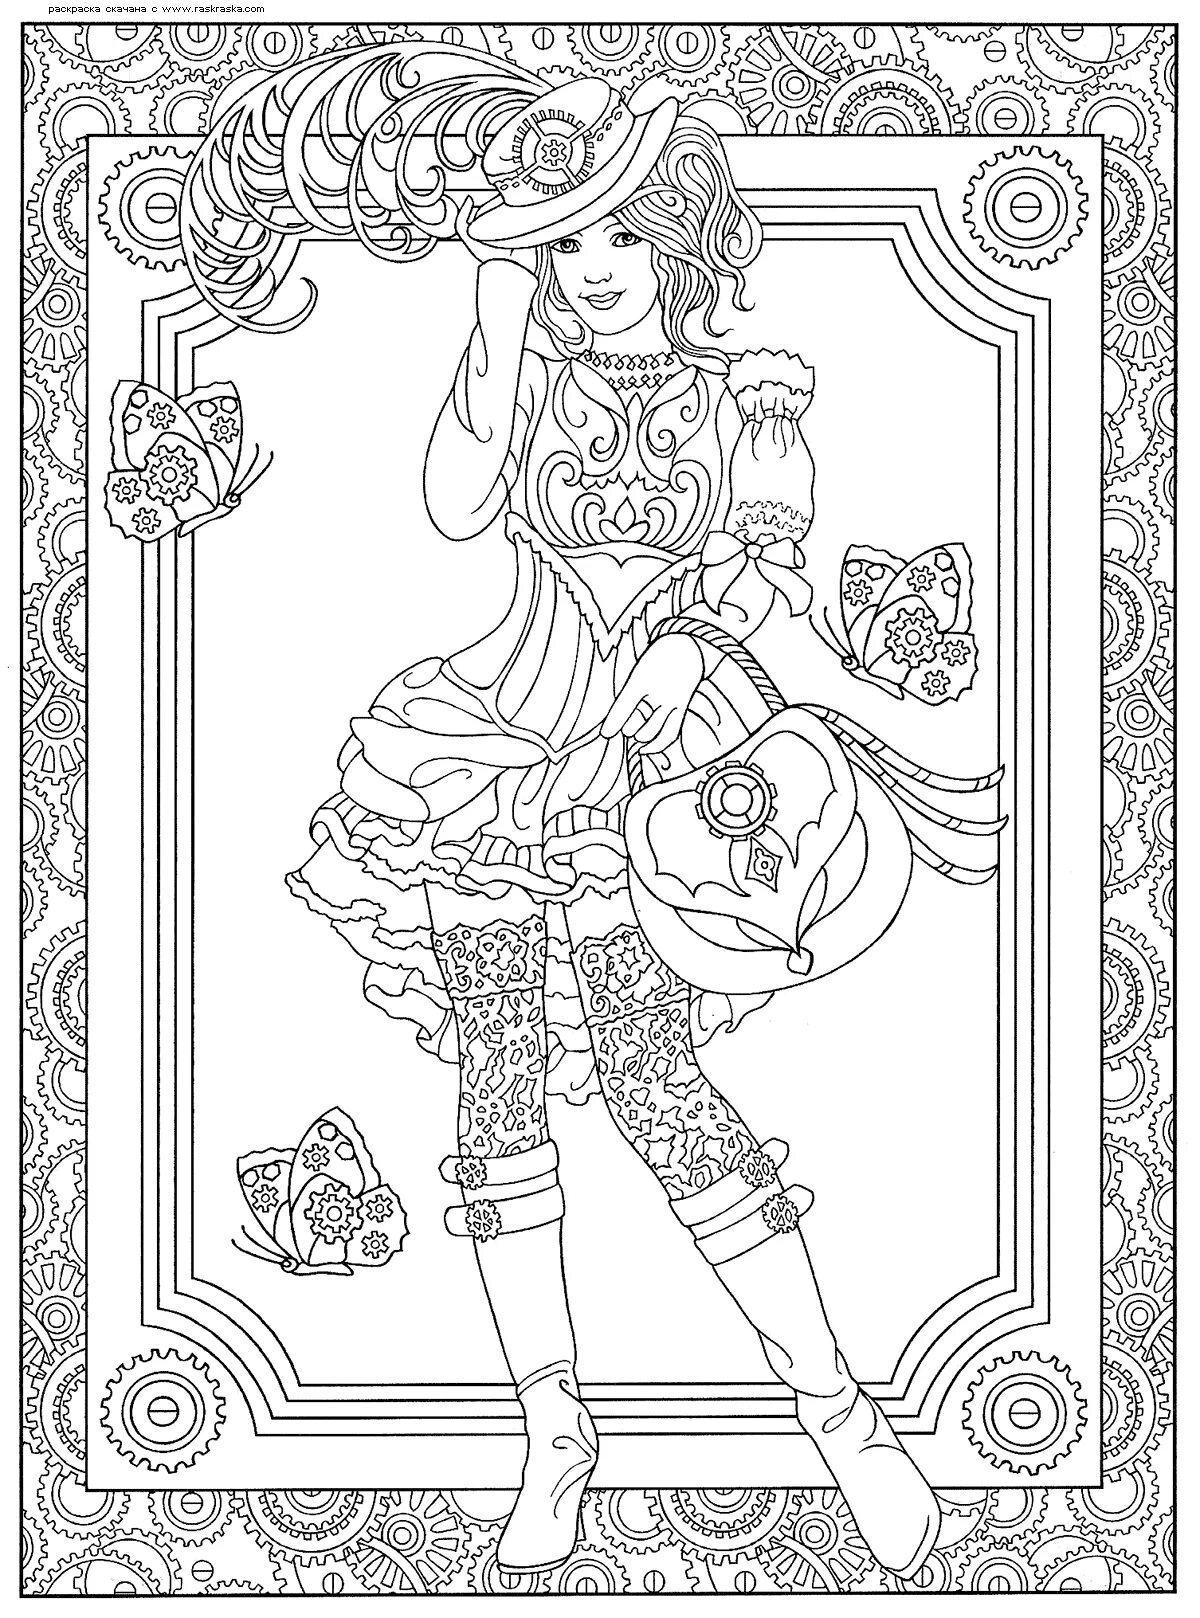 Surreal steampunk coloring book